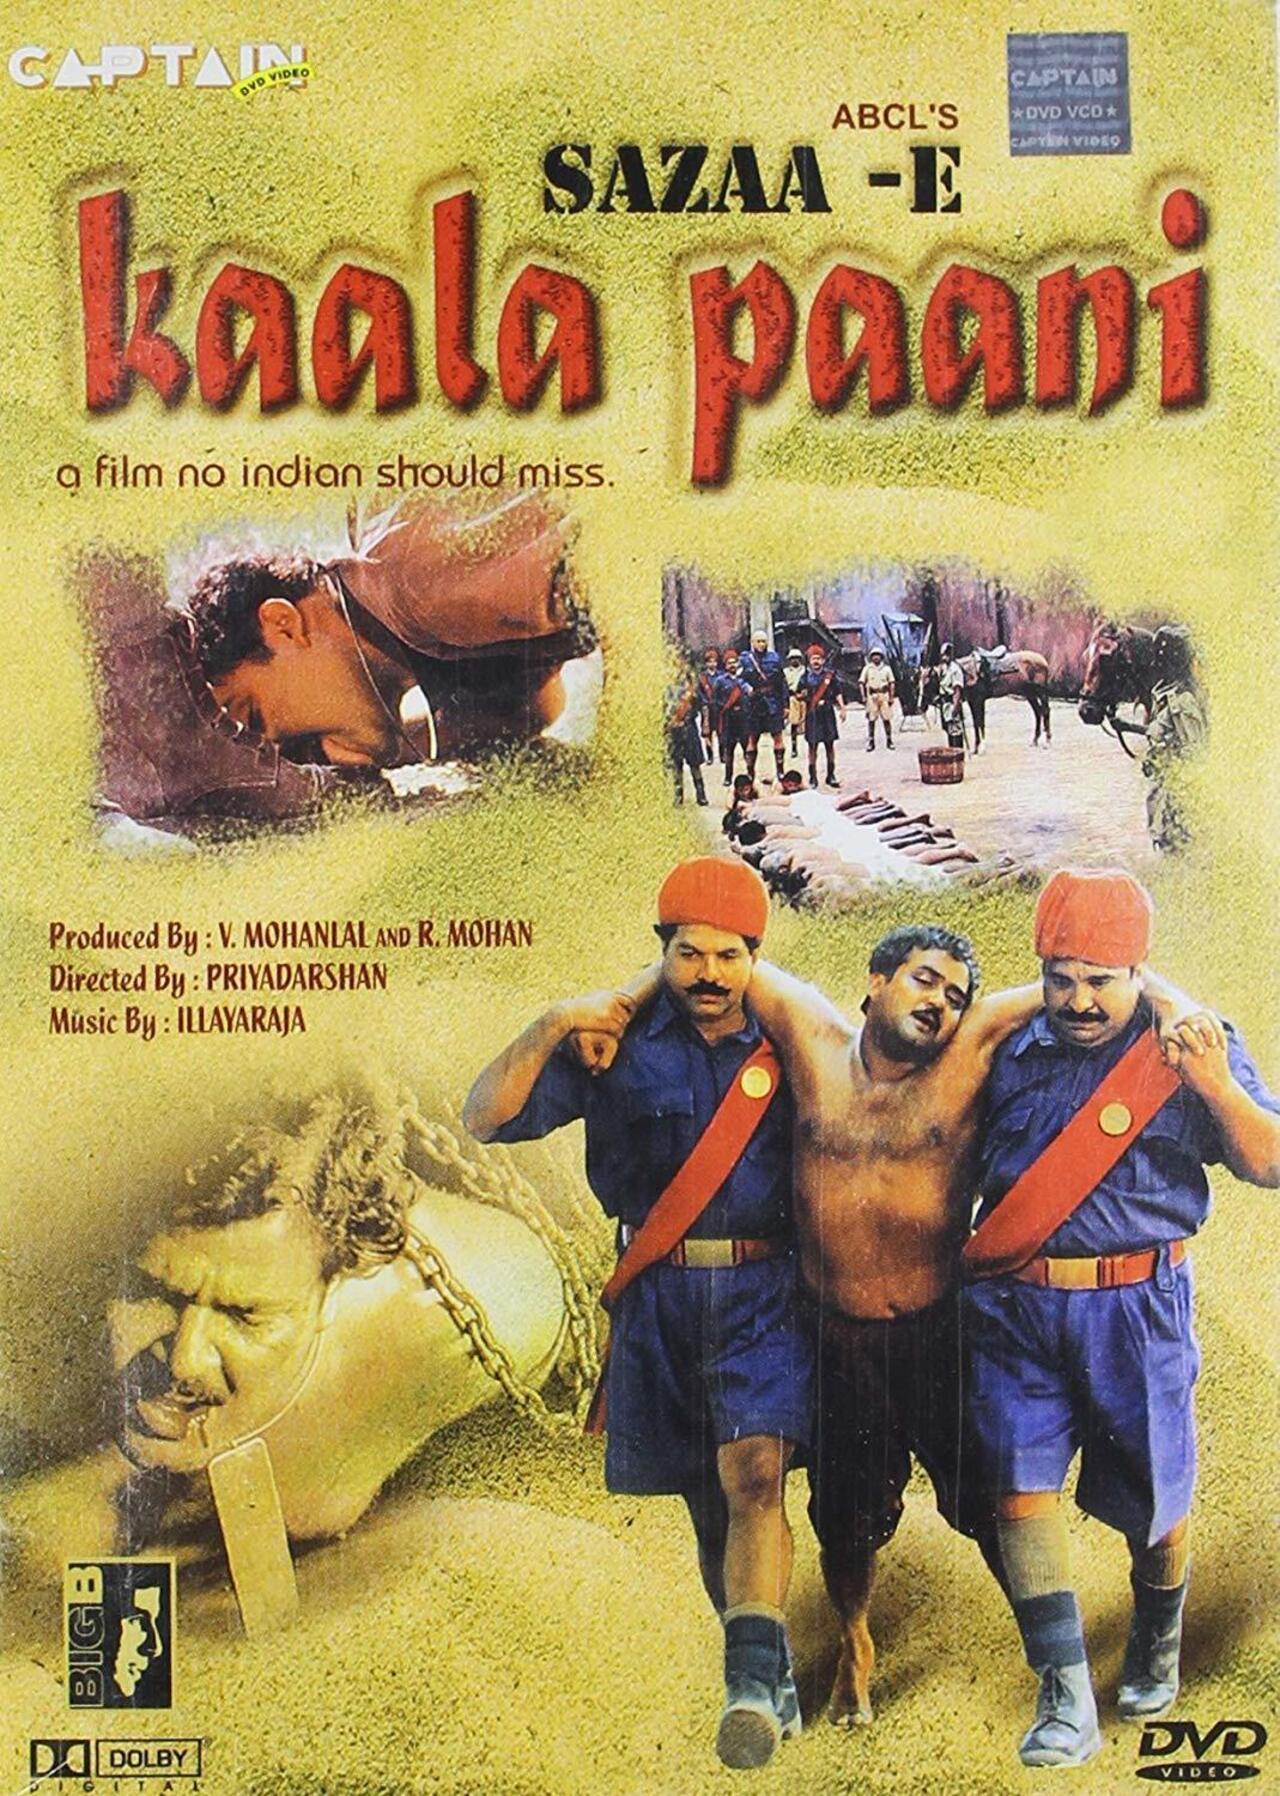 Set in the pre-independence era, the film tells the story of an Indian freedom fighter named Govardhan Menon, played by Mohanlal. He is falsely accused of bombing a train carrying British citizens and is subsequently sentenced to a long term at the Cellular Jail in Port Blair, Andaman. The film follows the brutalities that prisoneres and revolutionaries were subjected to during the colonial era
 